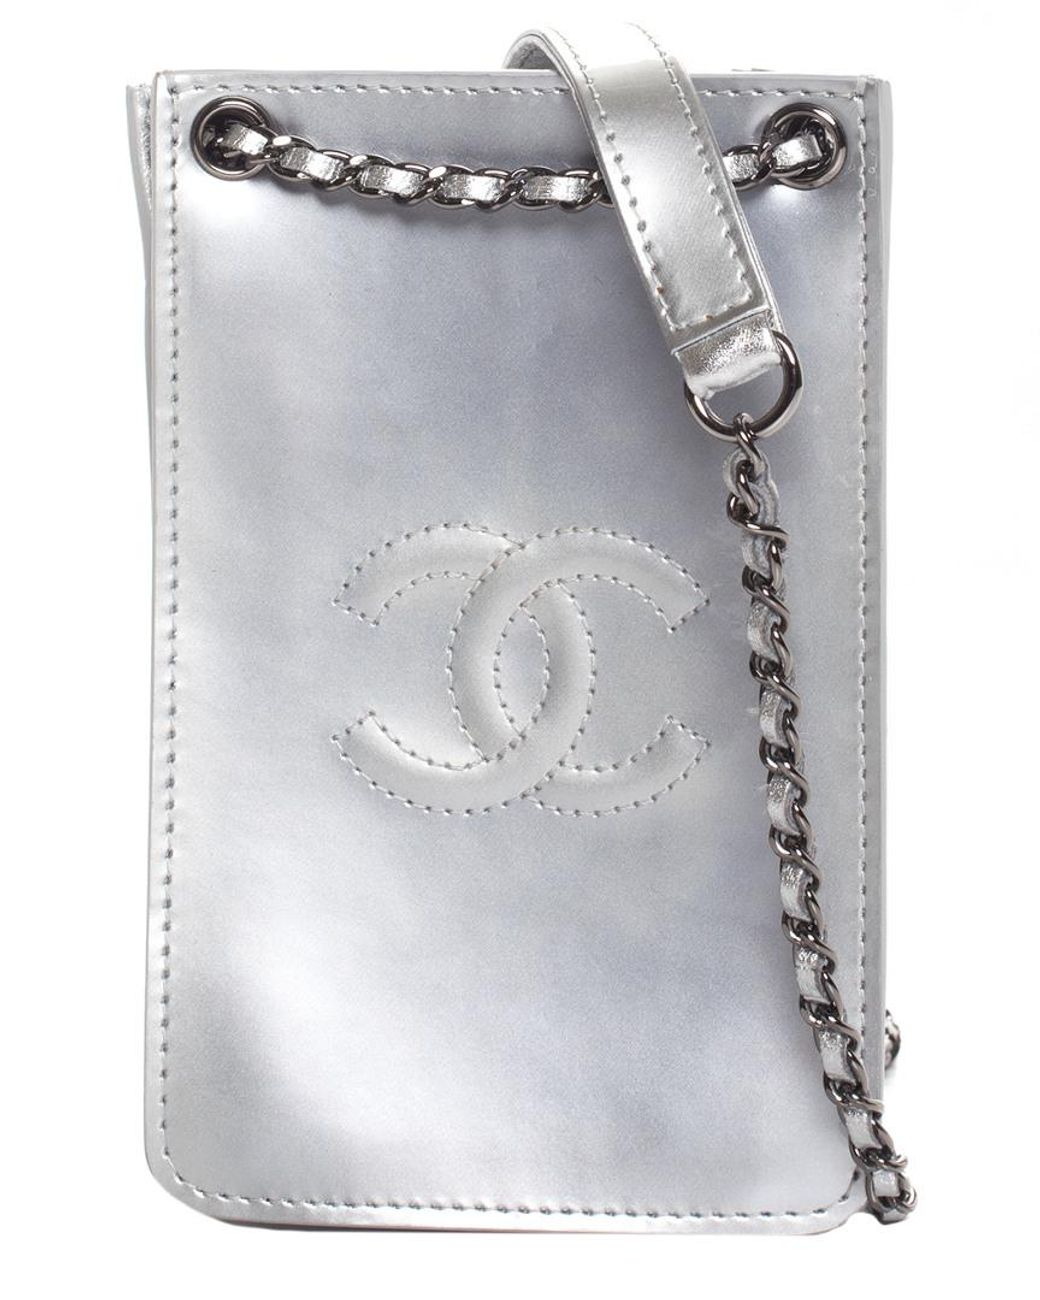 Chanel Silver Metallic Leather Cc Chain Strap Phone Case | Lyst